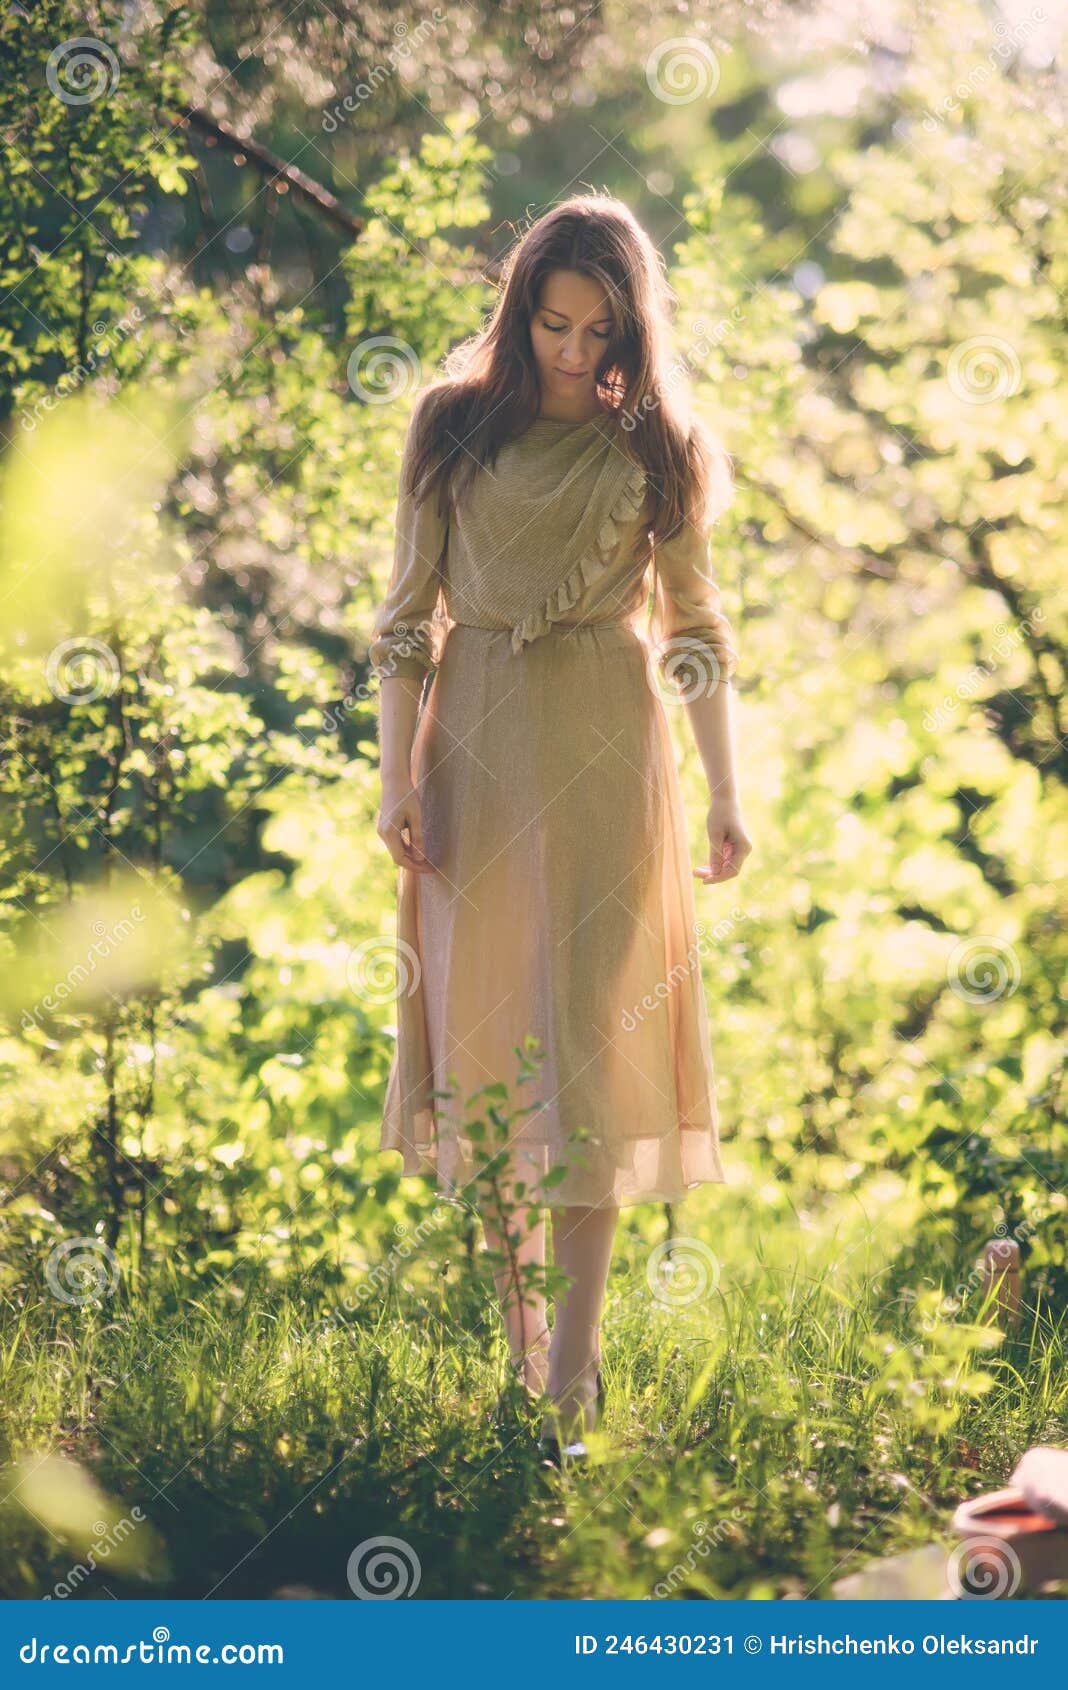 girl in a long dress in the sun. post processing